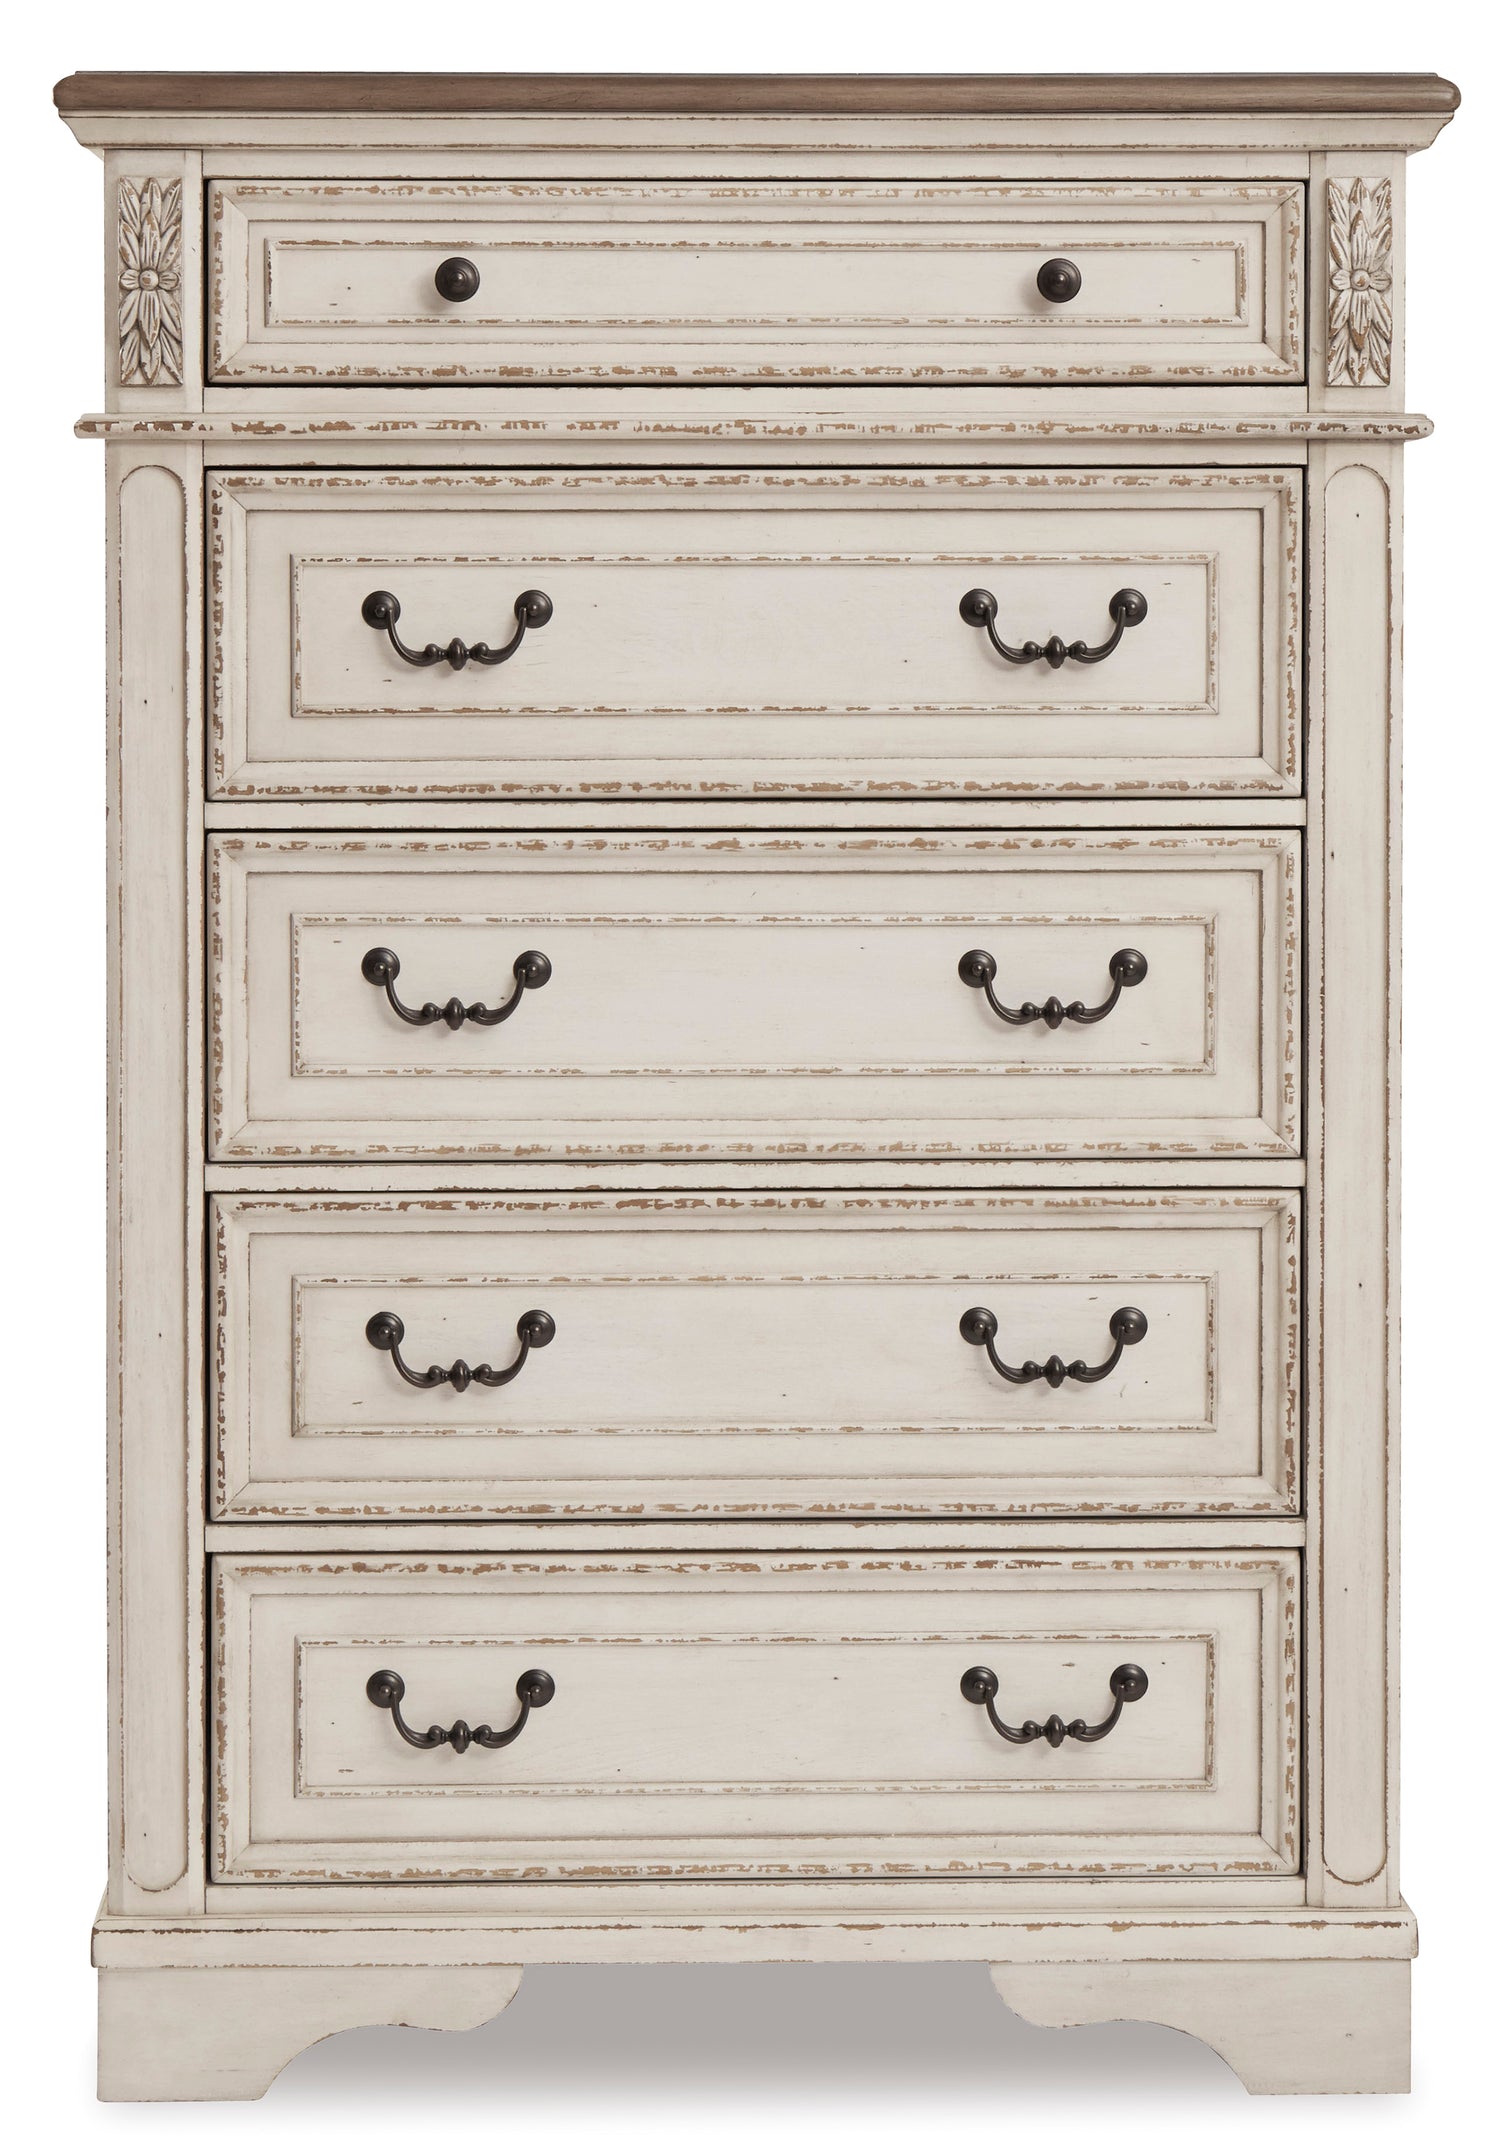 Realyn Two-tone Chest of Drawers